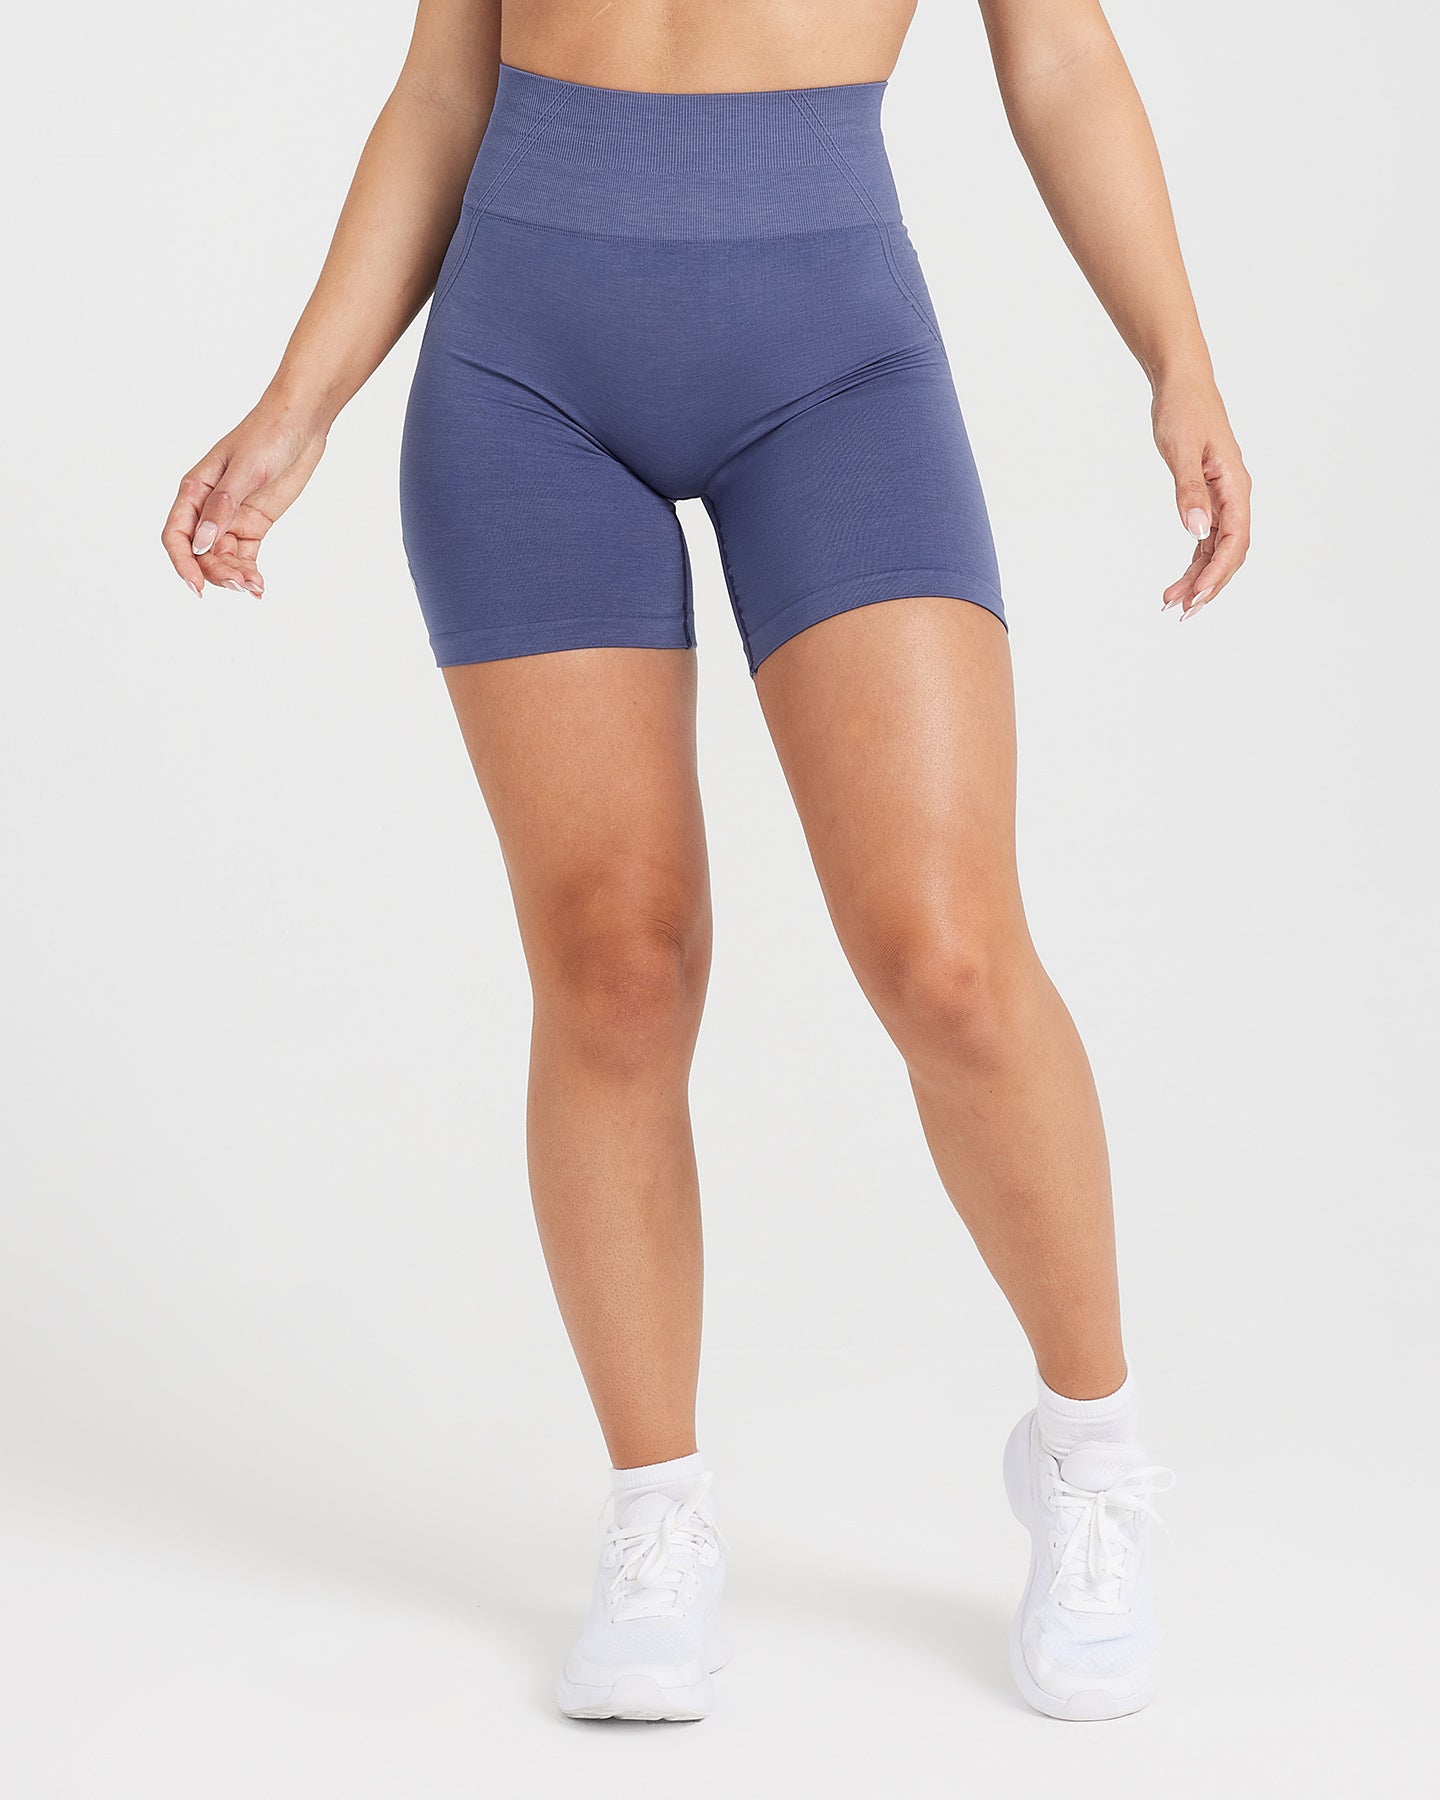 Cycling Shorts for Women - Slate Blue | Oner Active US | Weite Hosen